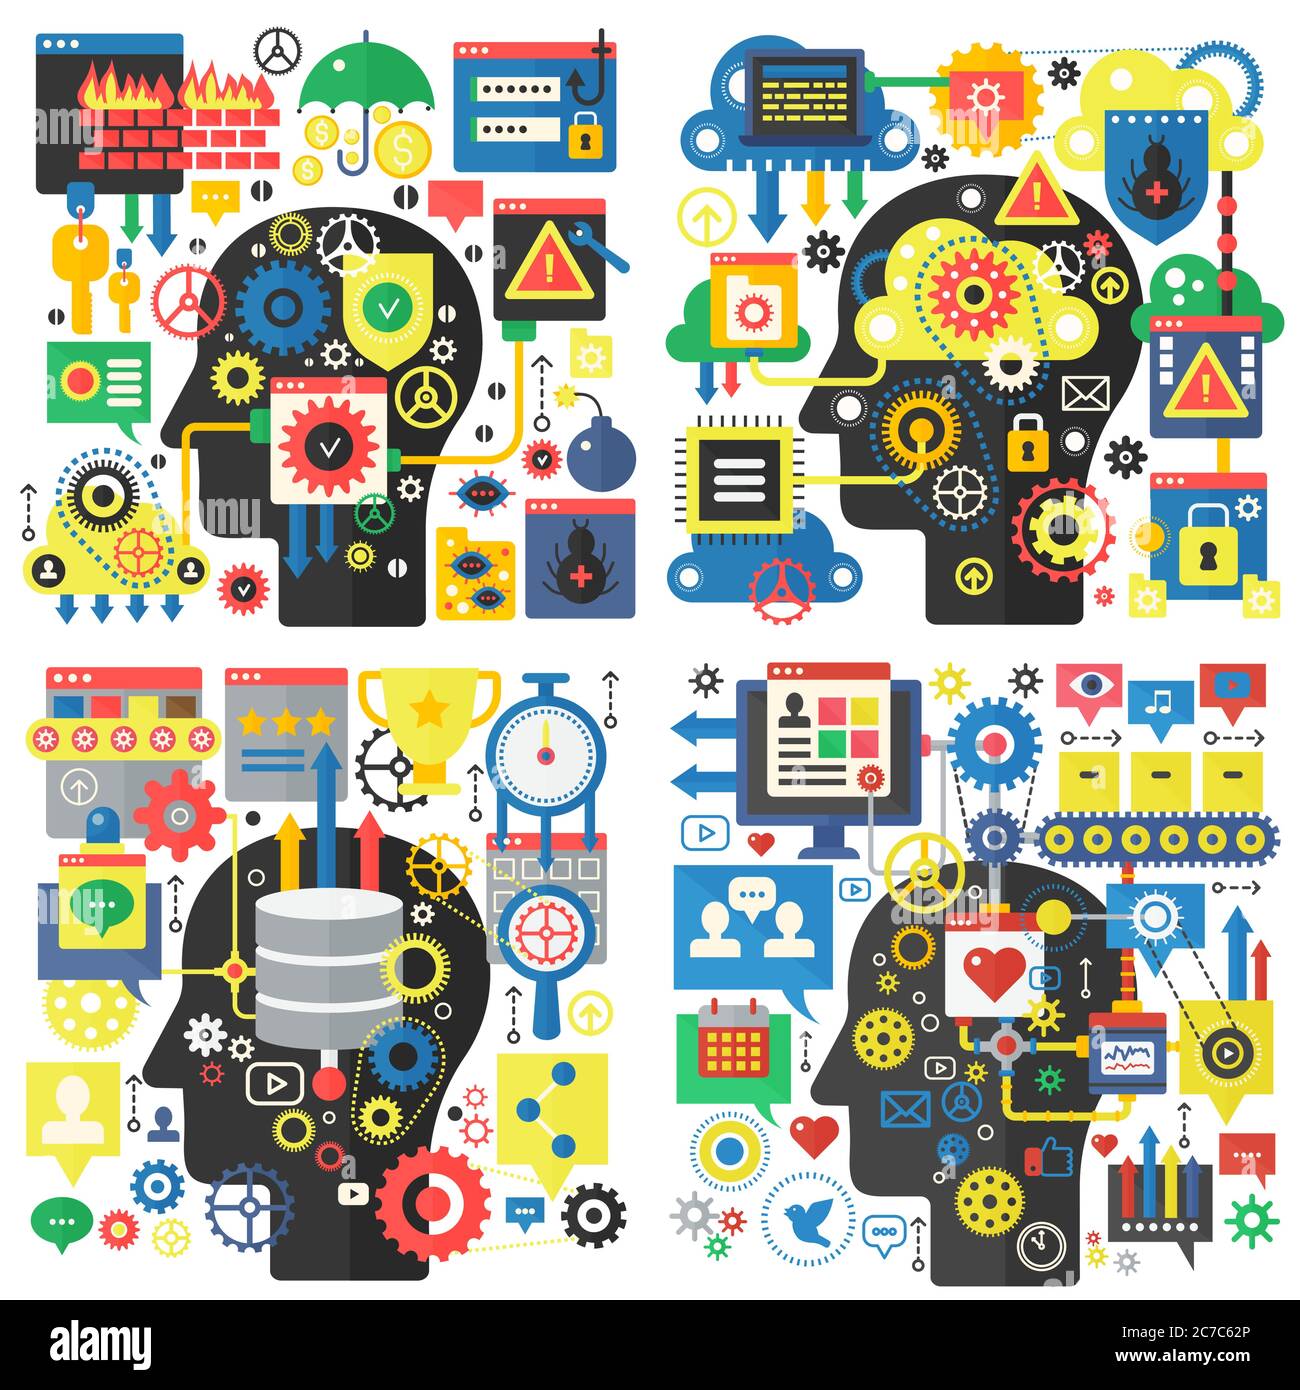 Infographic flat design head basic vector concept of creativity and research, social media, global network technology, online communication, computer protection and cyber security Stock Vector